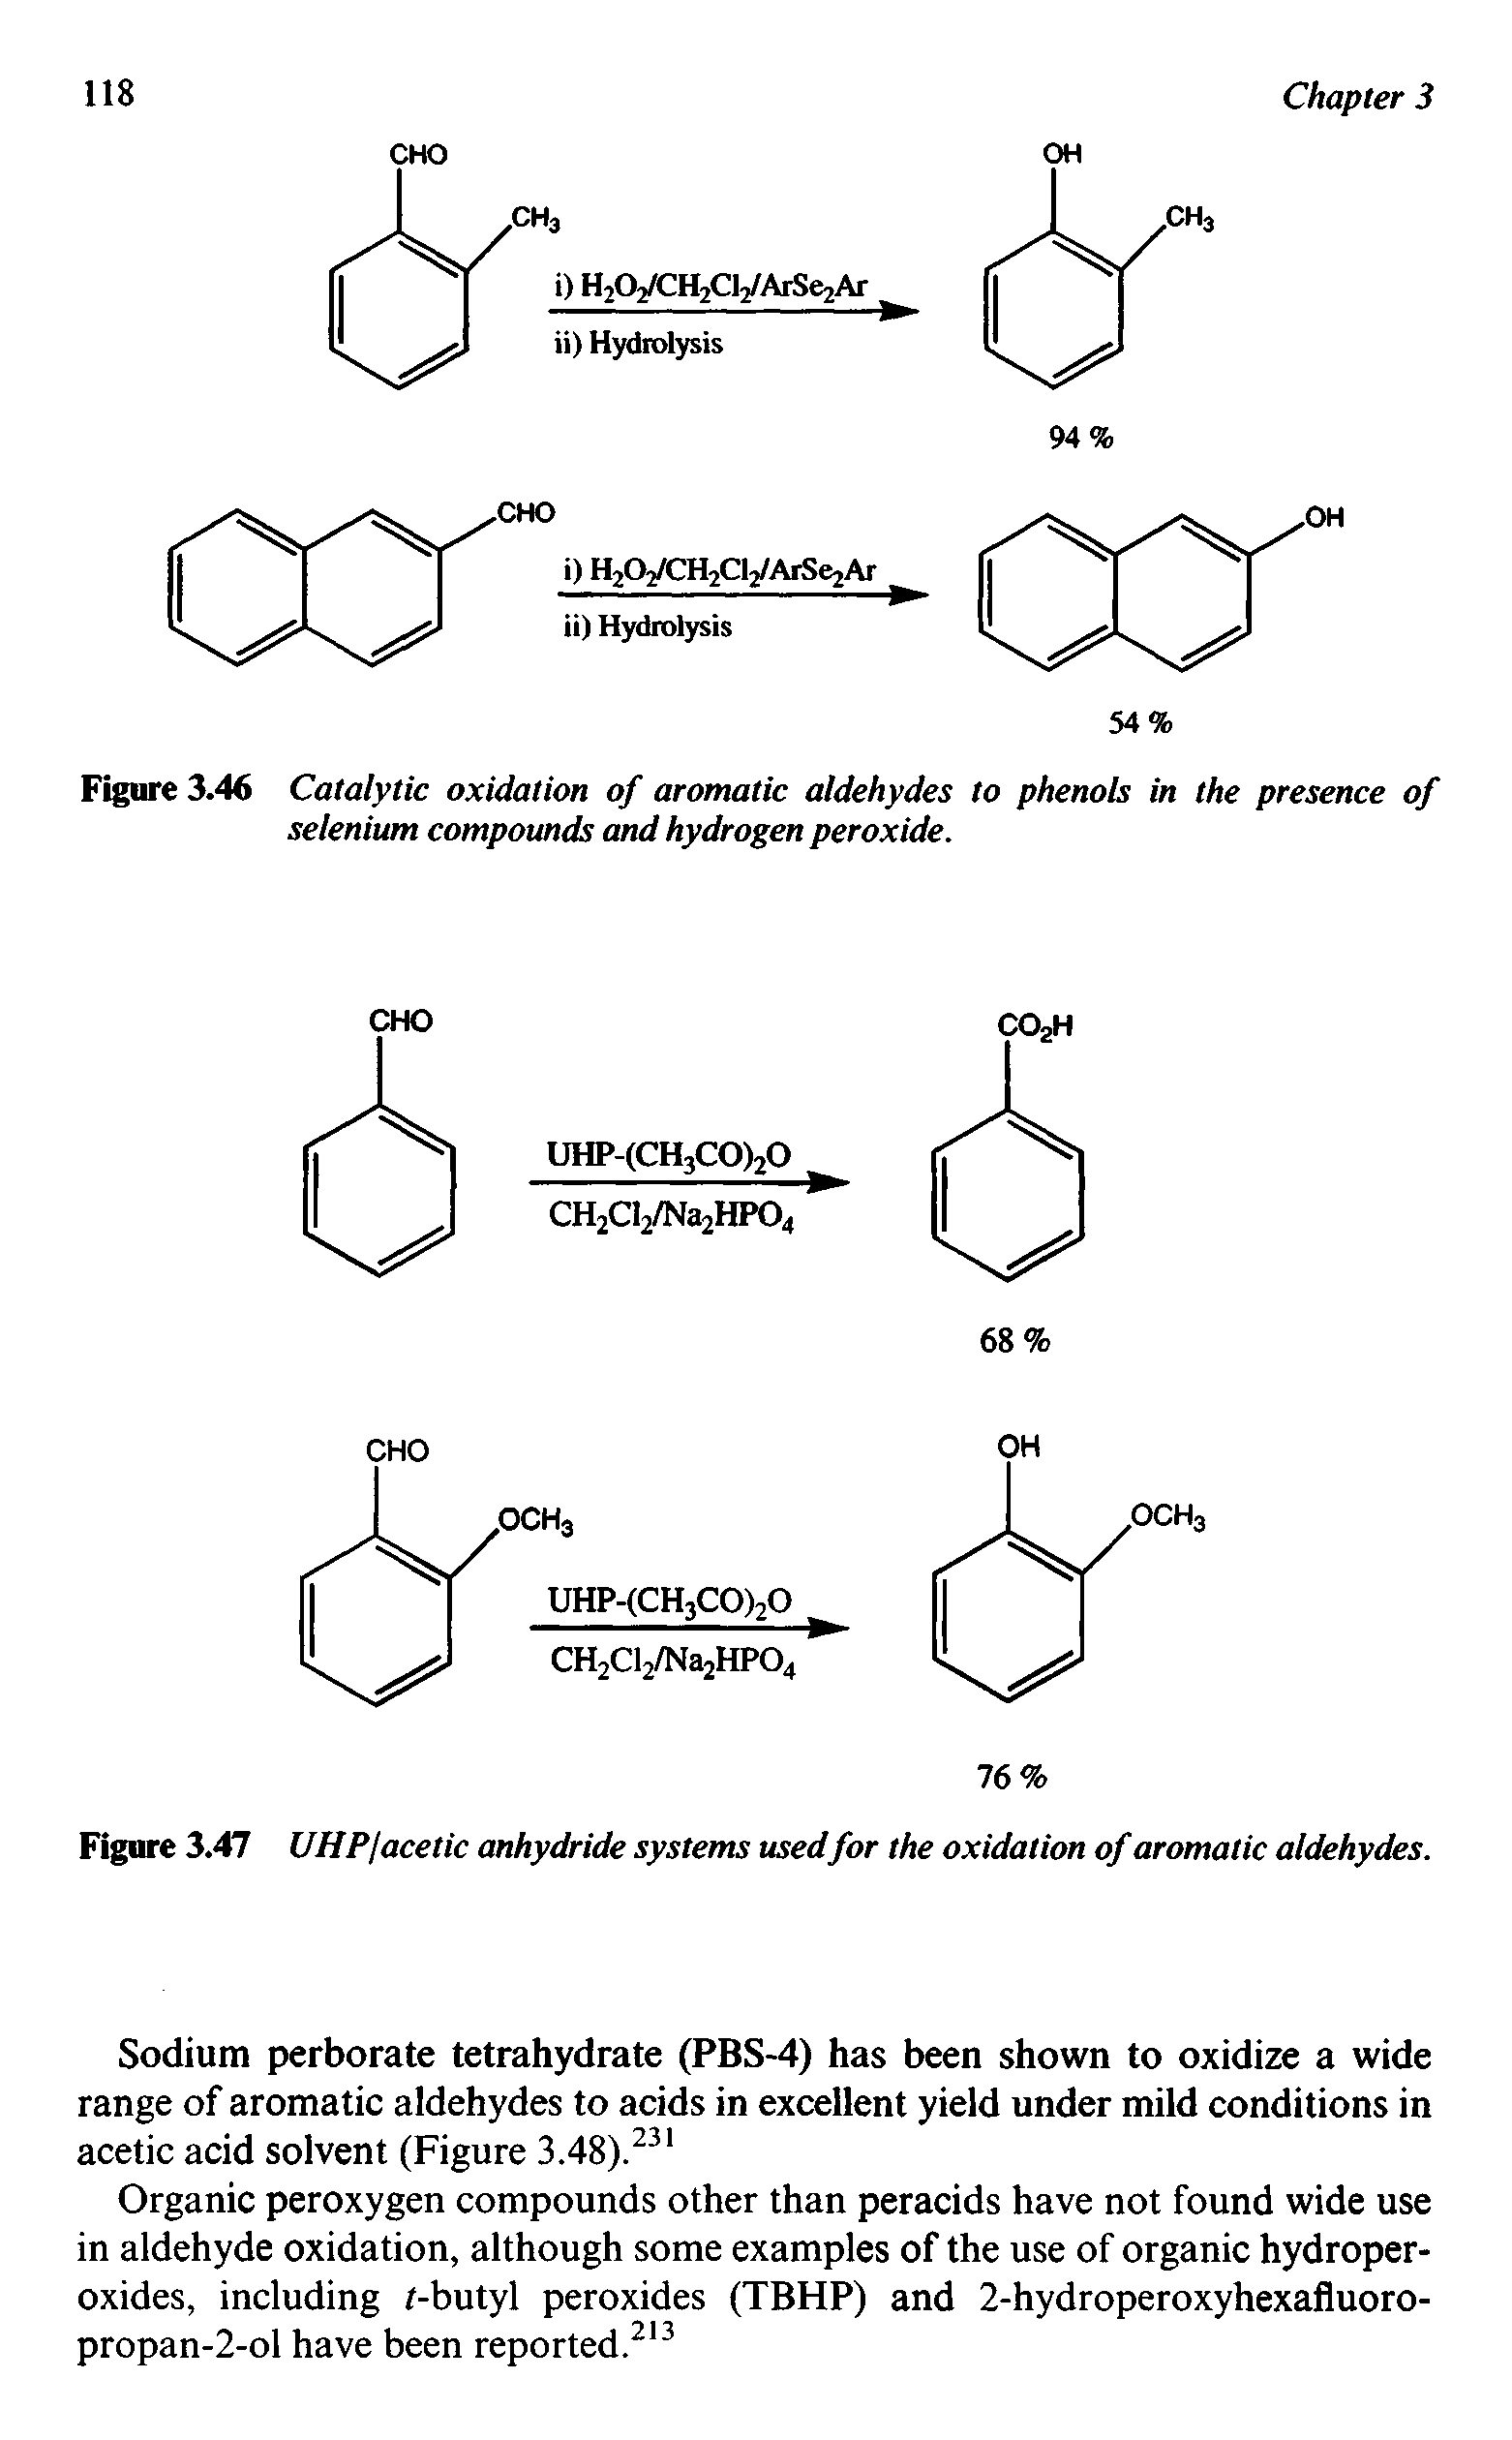 Figure 3.46 Catalytic oxidation of aromatic aldehydes to phenols in the presence of selenium compounds and hydrogen peroxide.